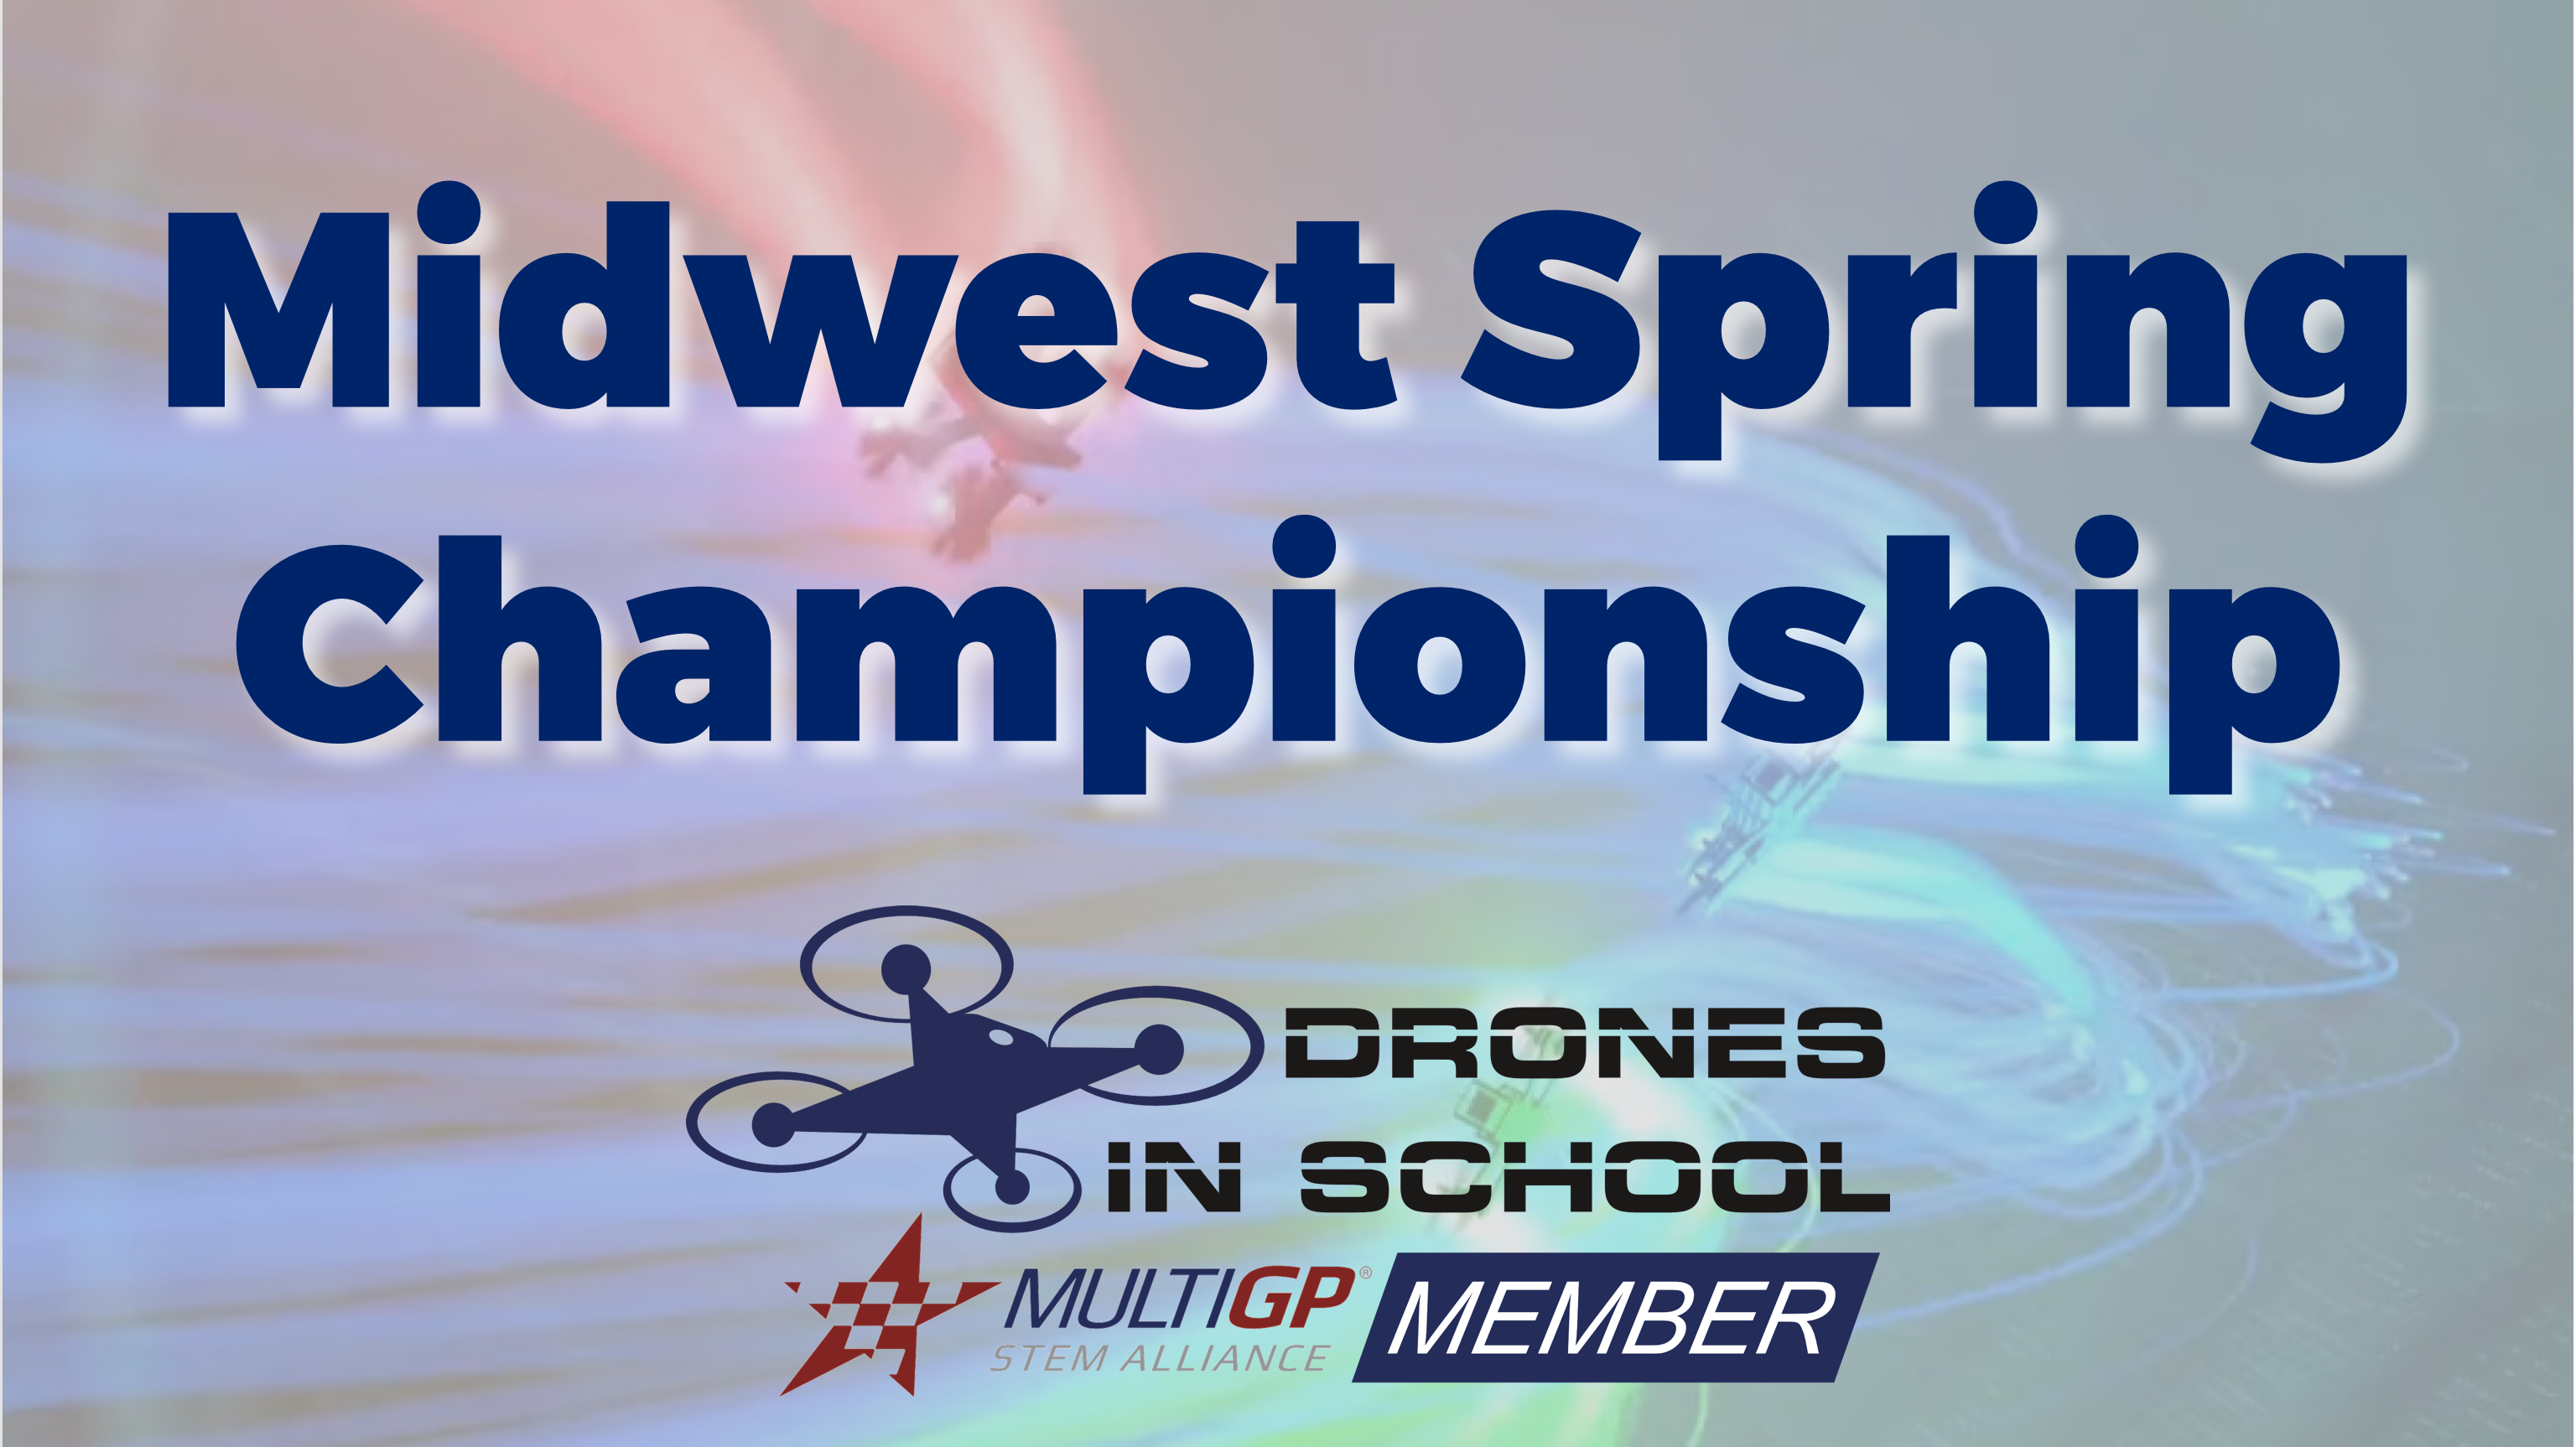 Midwest Spring Championship